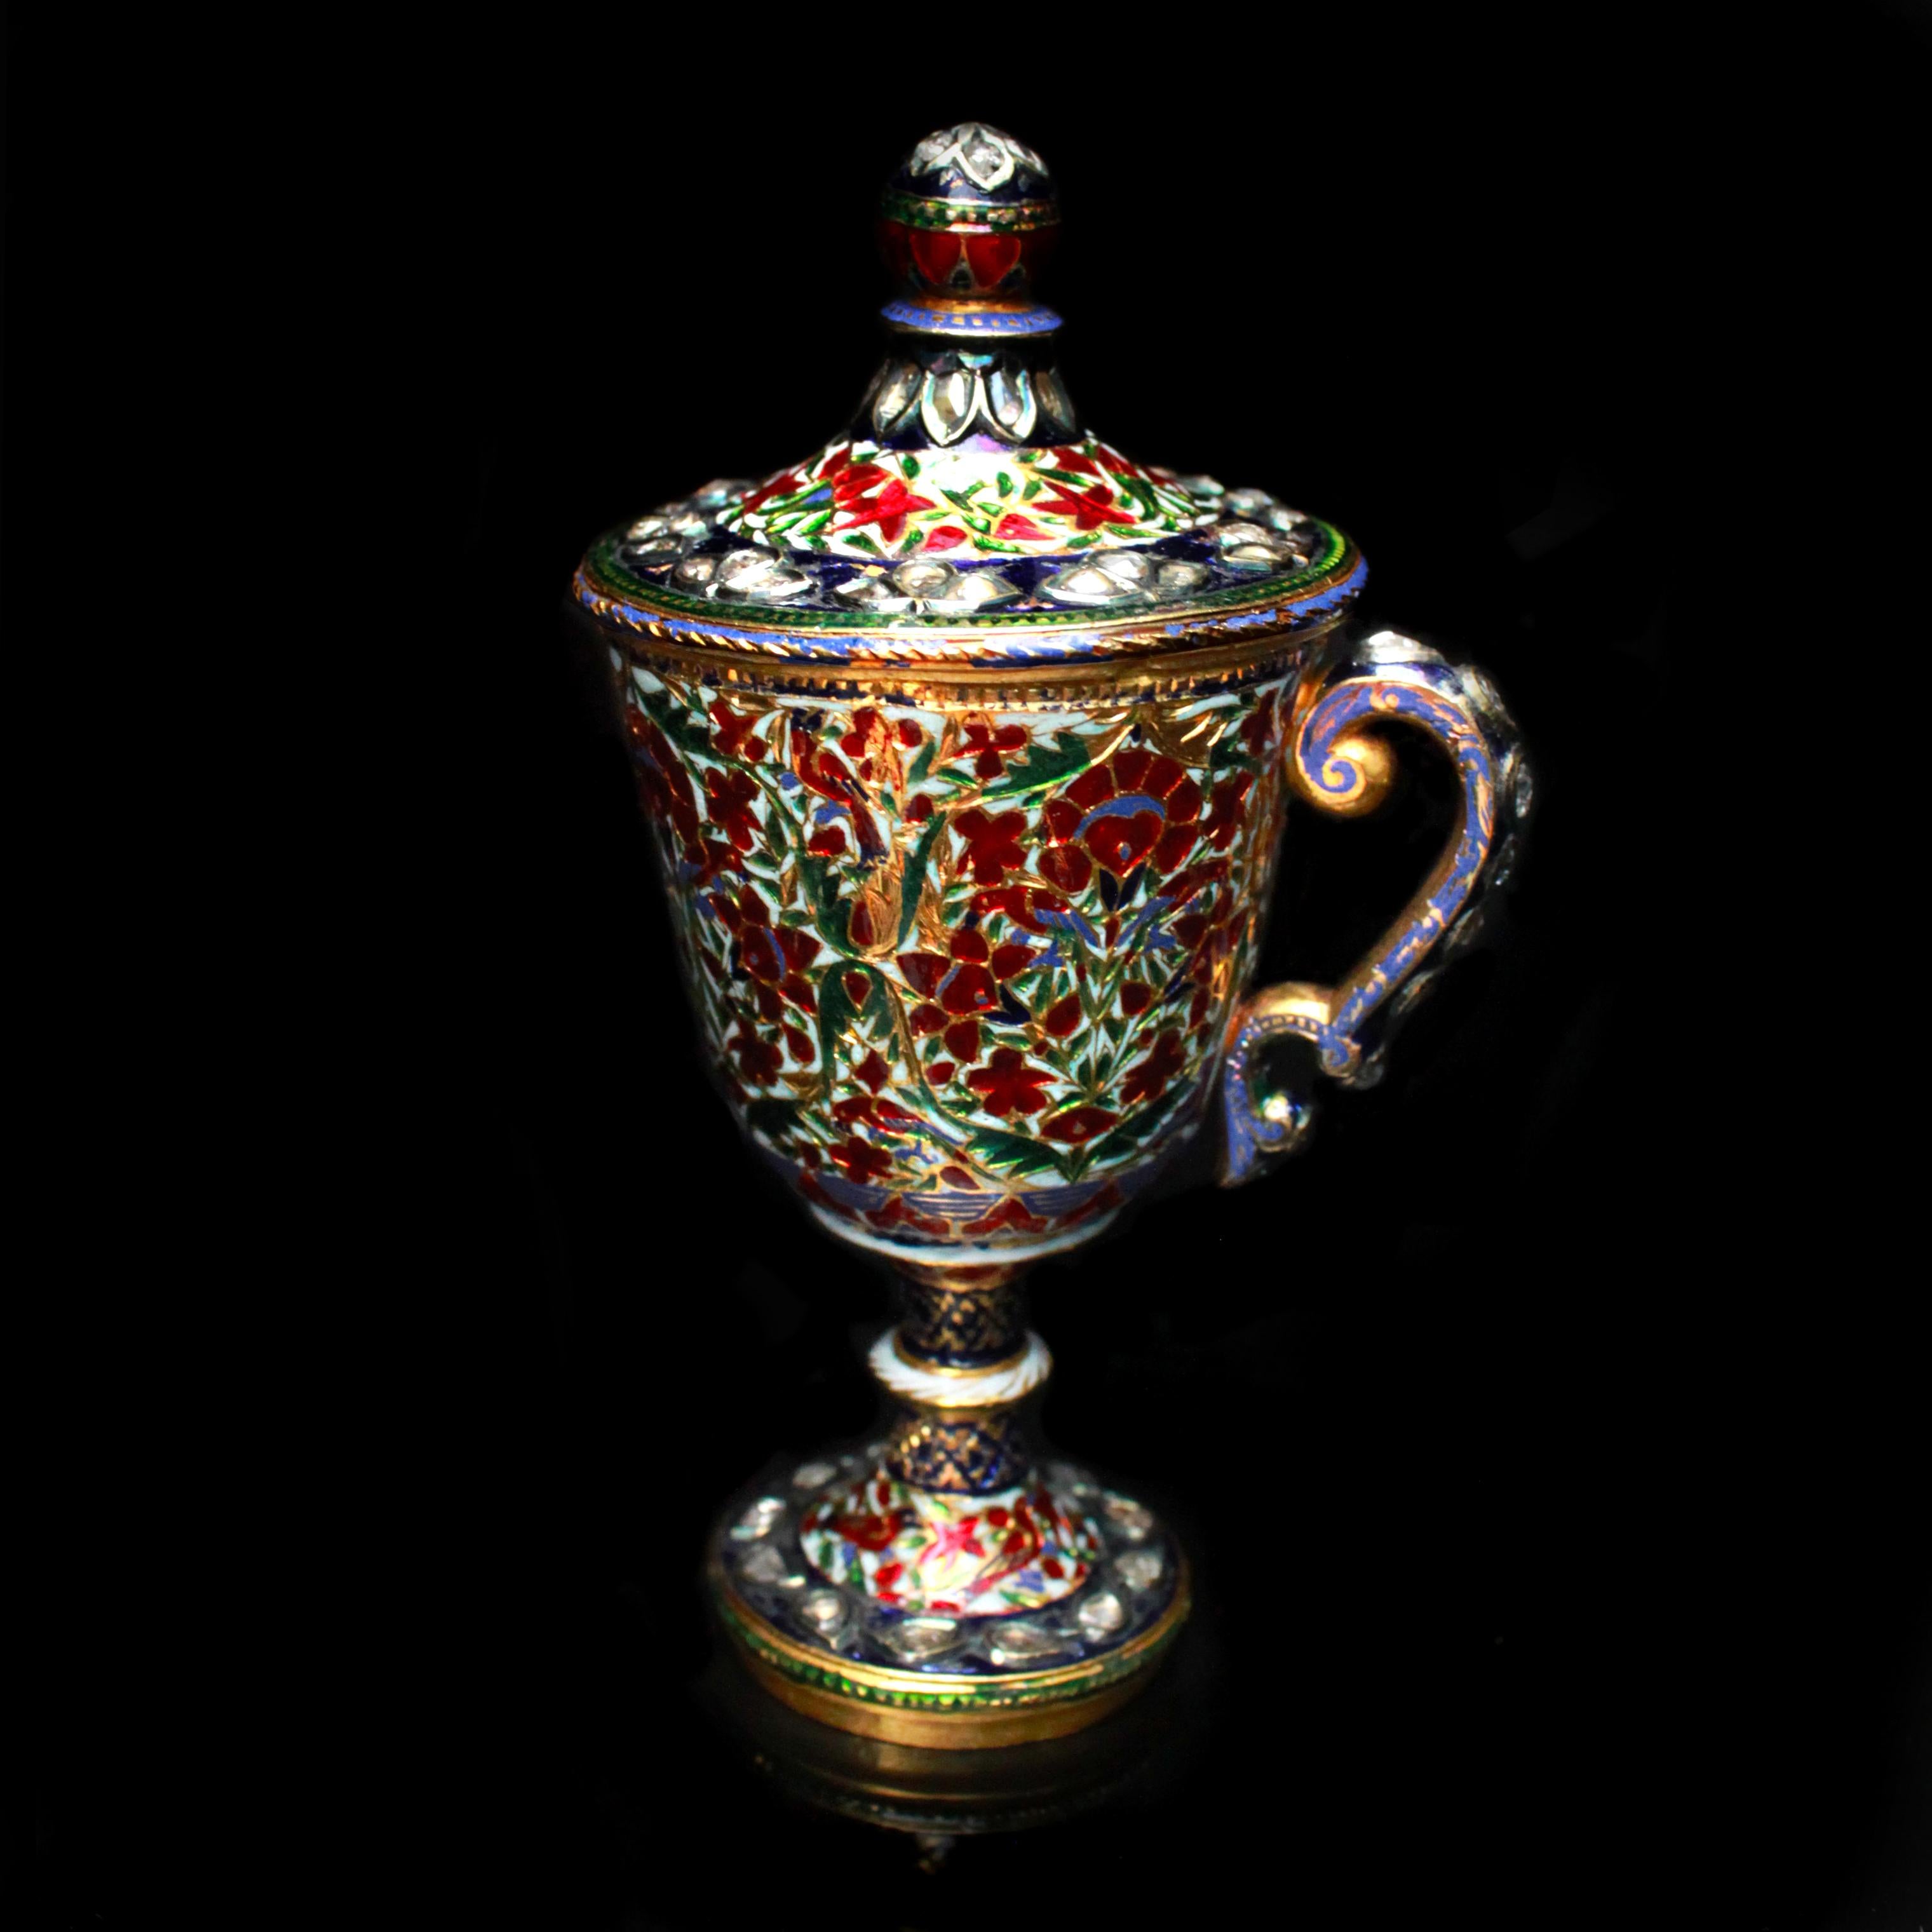 Women's or Men's Rare Mughal Enamel and Diamond Cup, Early 19th Century For Sale